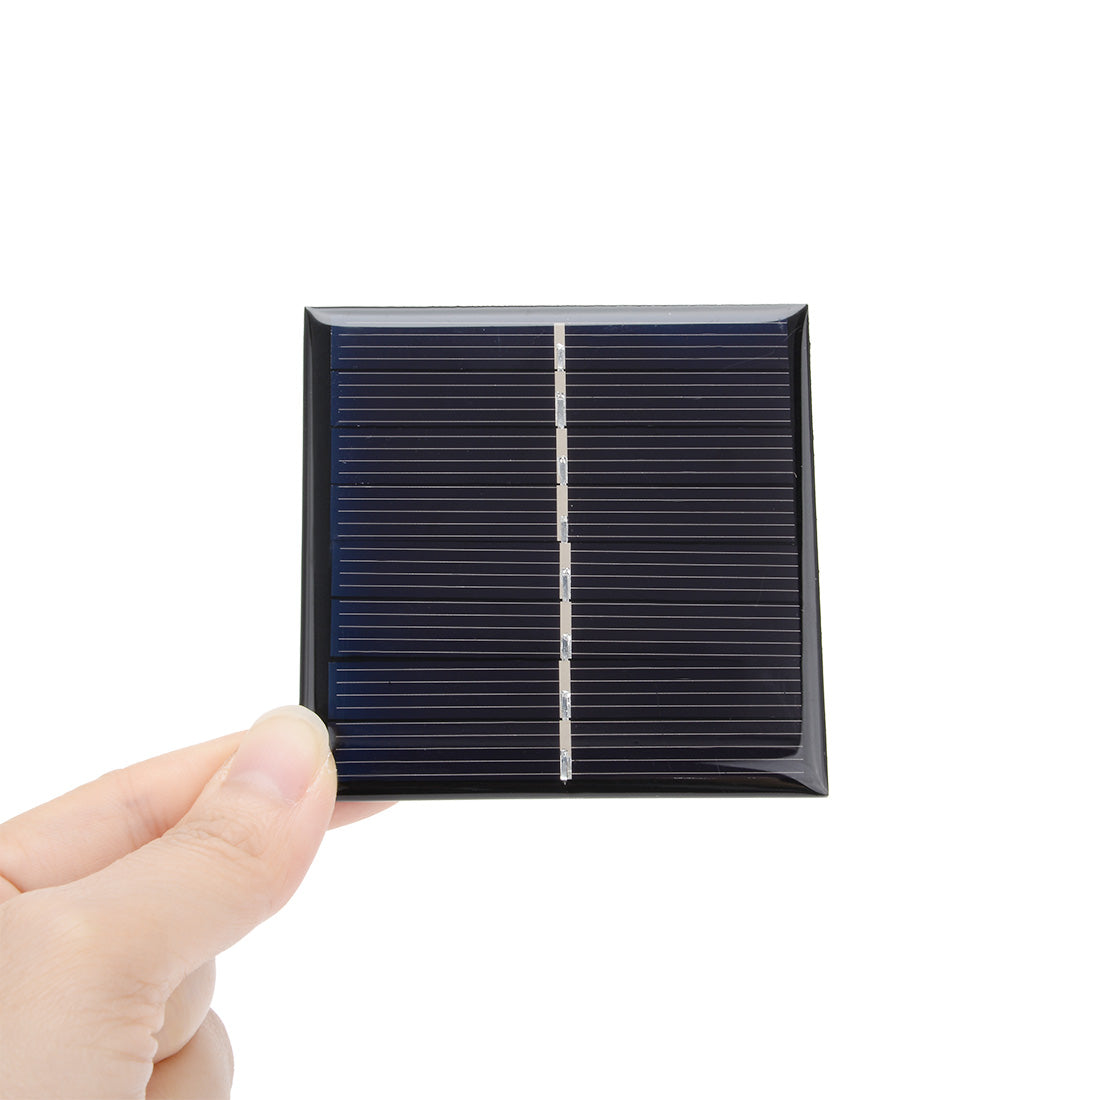 uxcell Uxcell 5Pcs 4V 100mA Poly Mini Solar Cell Panel Module DIY for Light Toys Charger 70mm x 70mm